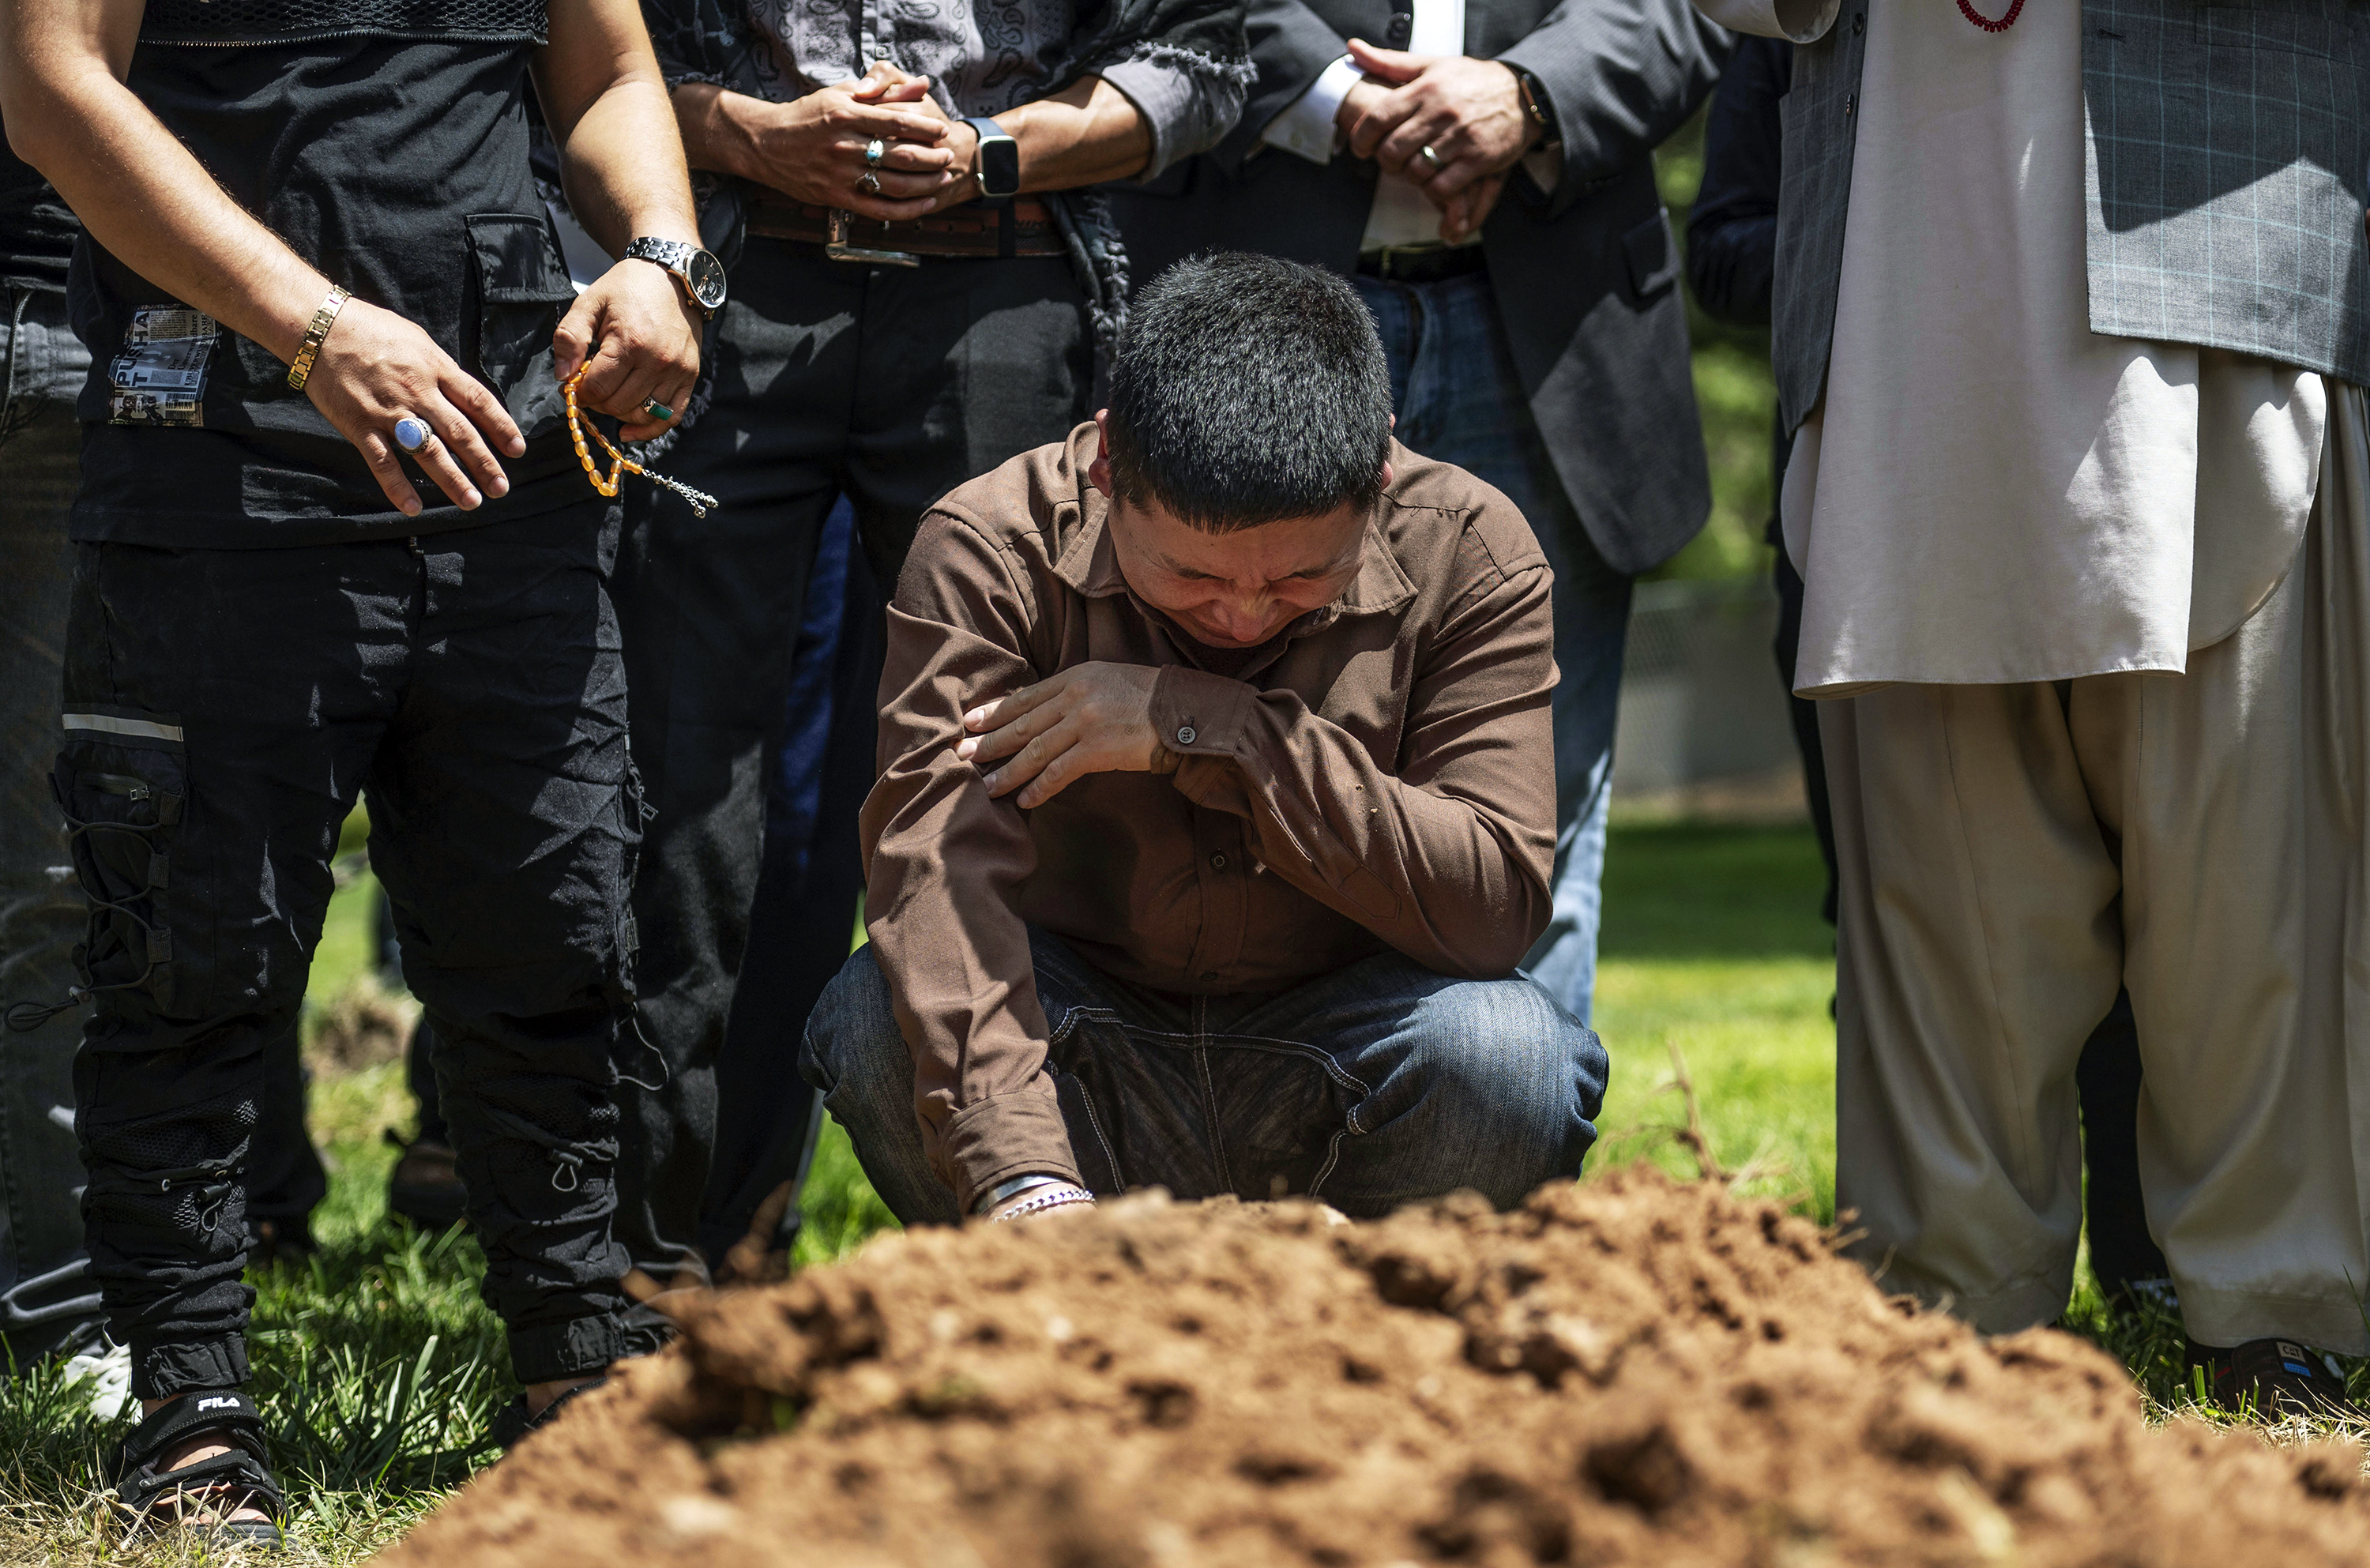 Altaf Hussain cries over the grave of his brother Aftab Hussein at Fairview Memorial Park in Albuquerque, N.M., on Friday, Aug. 5, 2022. Aftab was one of four Muslim men shot and killed in Albuquerque since November. (Chancey Bush–The Albuquerque Journal/AP)